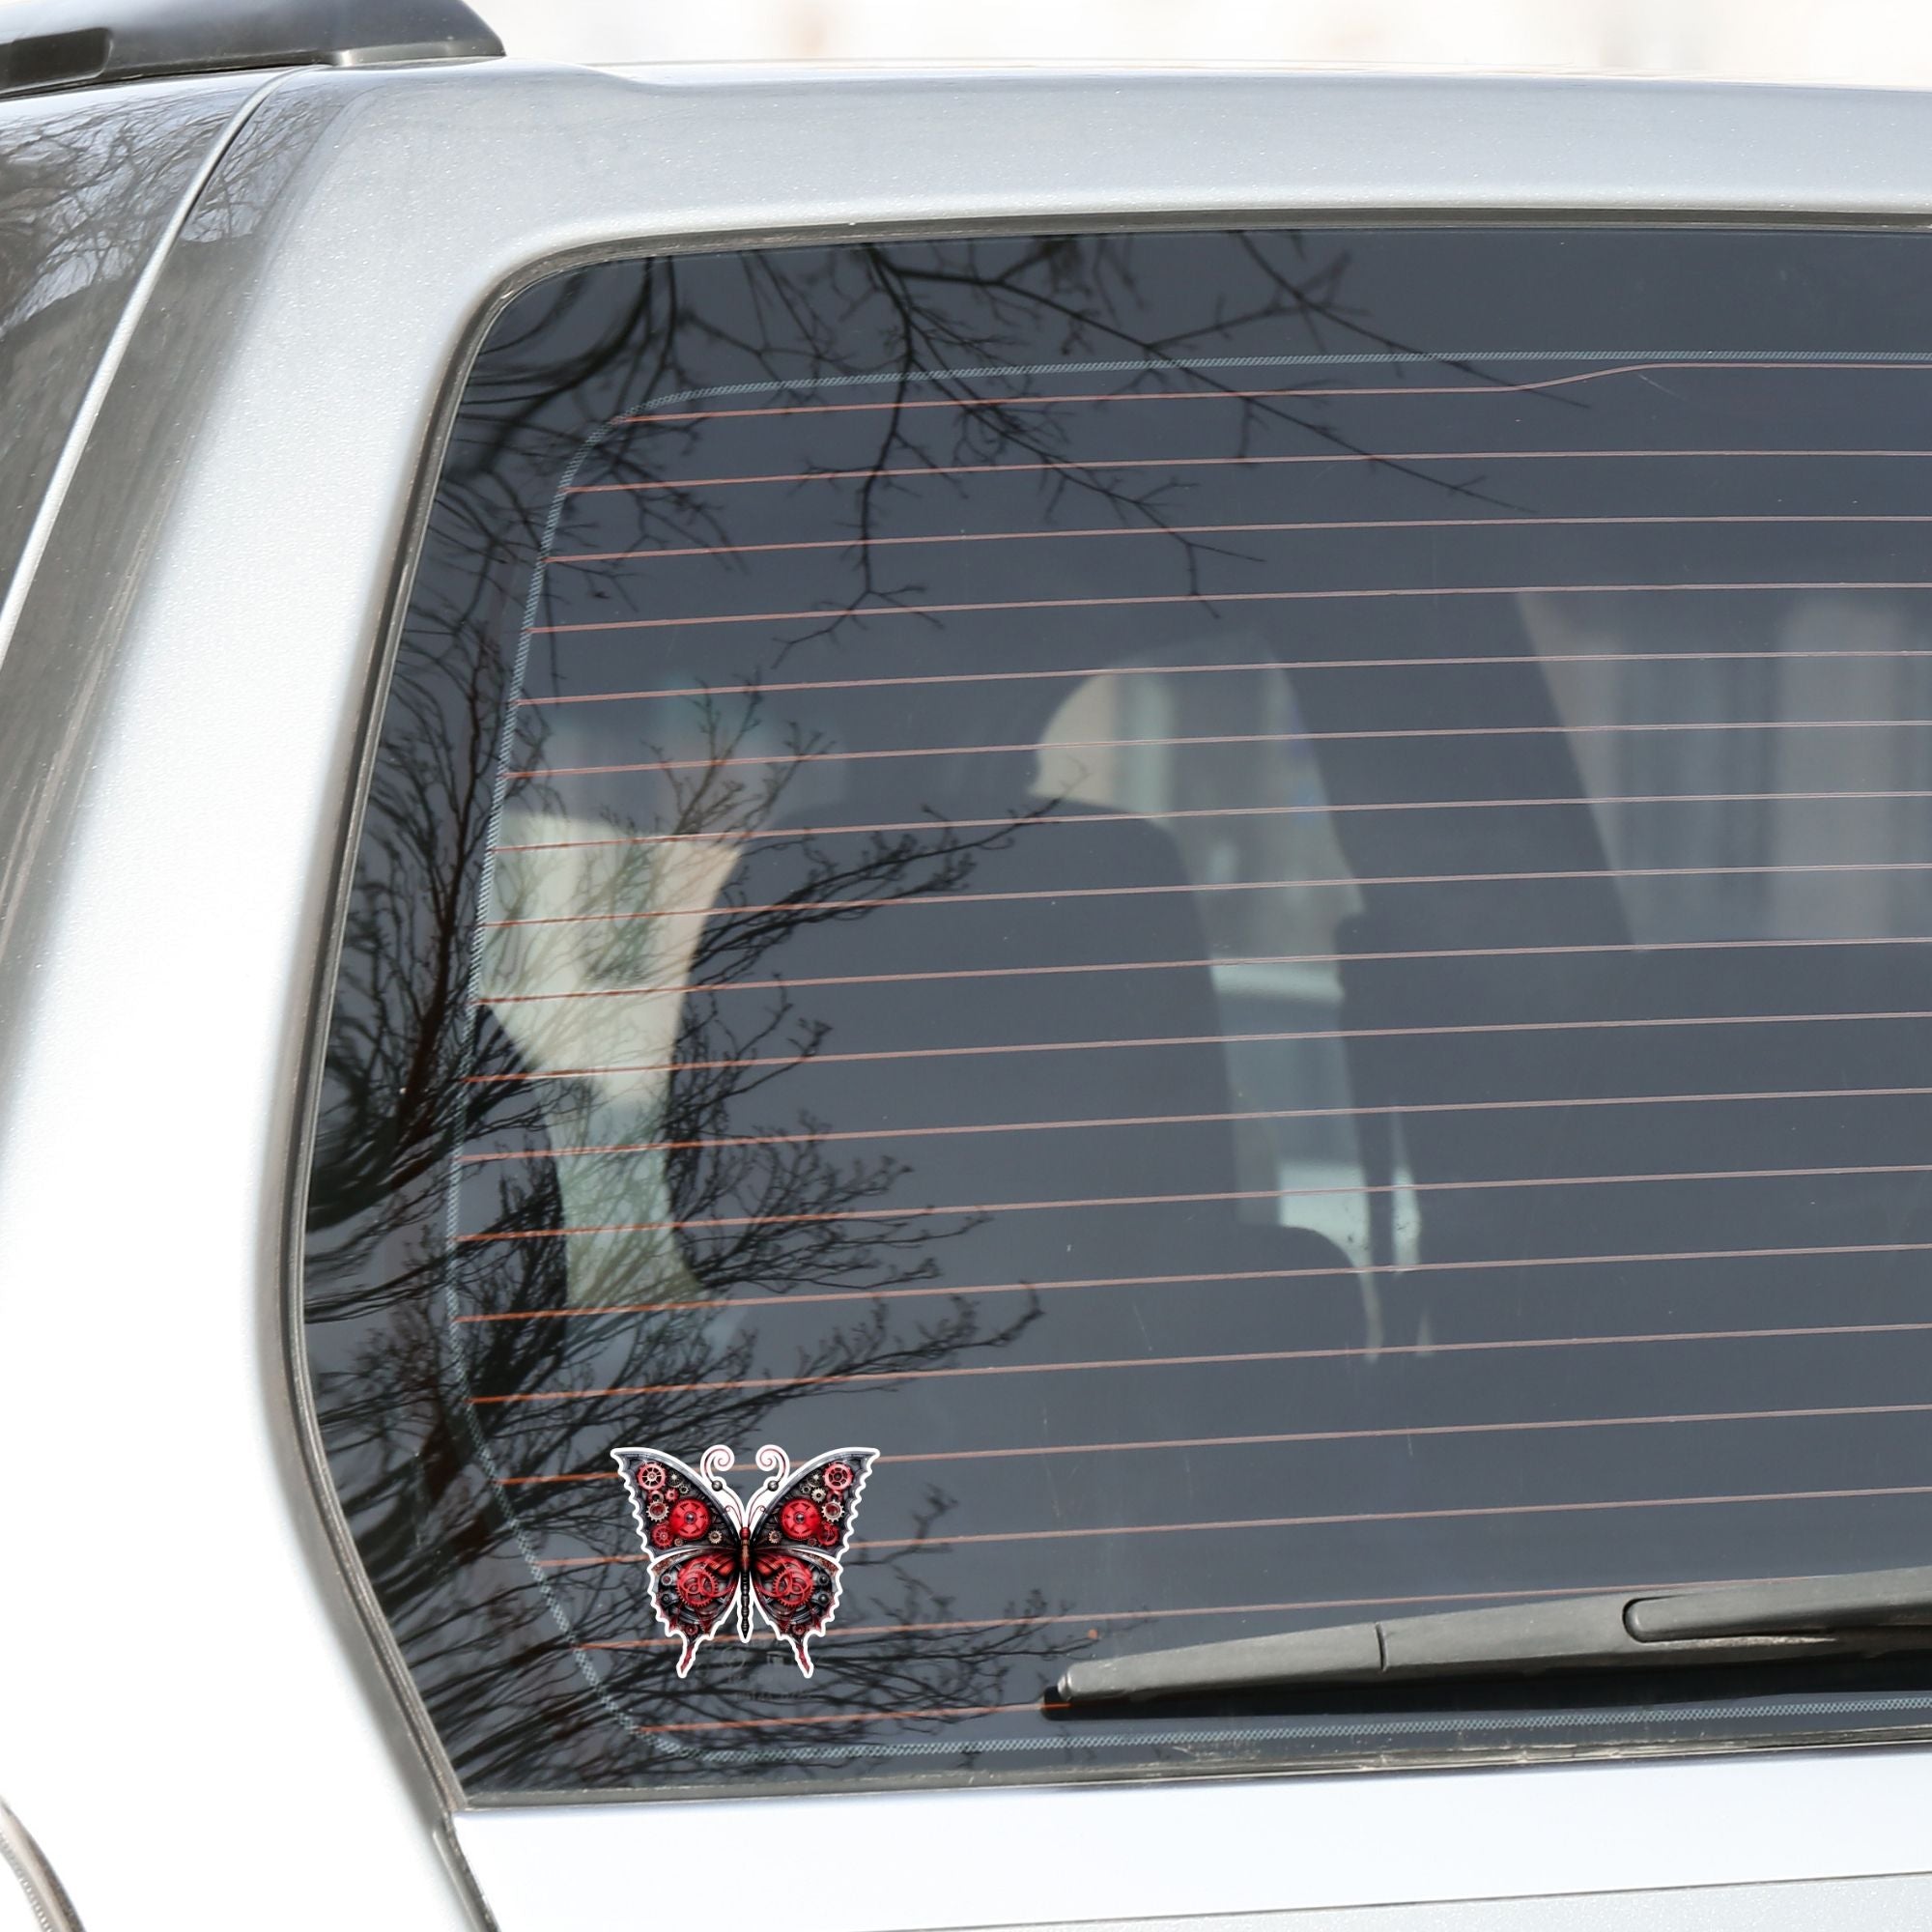 This image shows the Steampunk Butterfly 5 Die-Cut Sticker on the back window of a car.